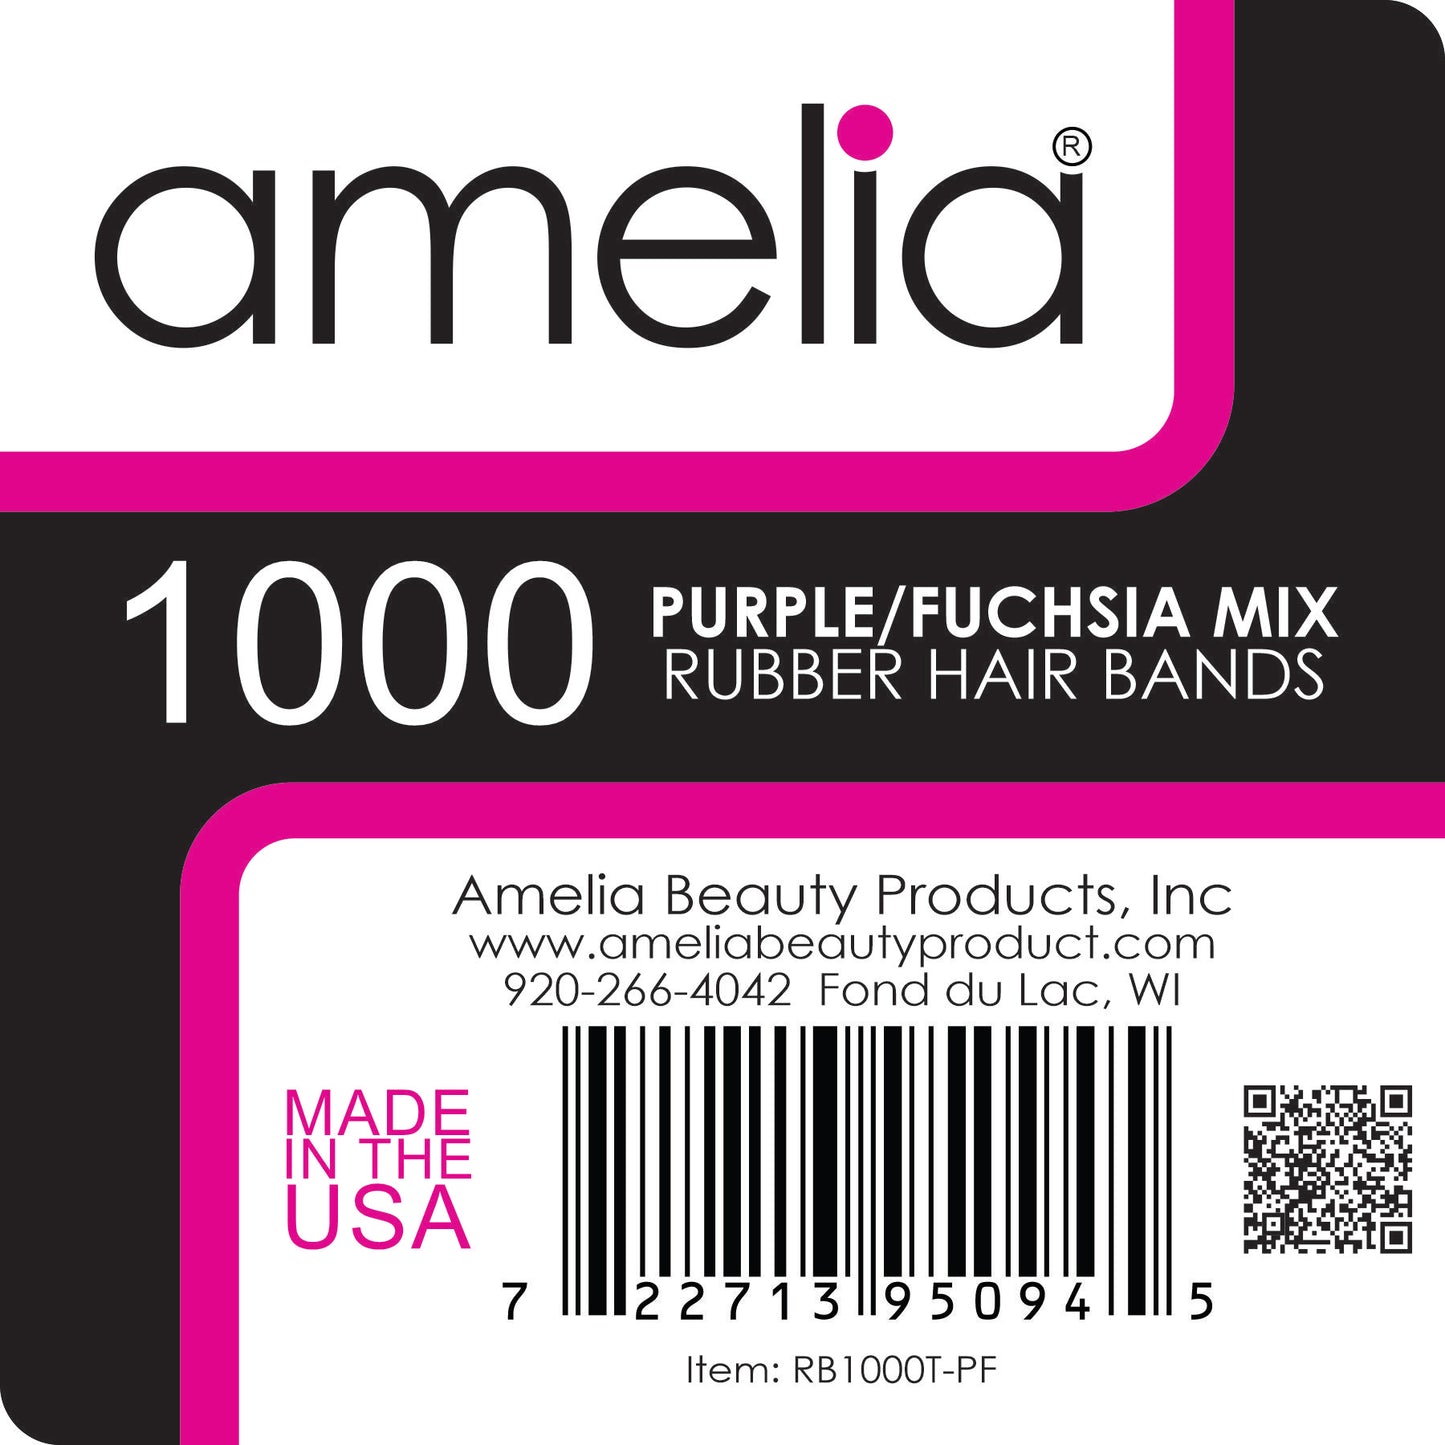 Amelia Beauty | 1/2in, Purple and Fuchsia Mix, Elastic Rubber Band Pony Tail Holders | Made in USA, Ideal for Ponytails, Braids, Twists, Dreadlocks, Styling Accessories for Women, Men and Girls | 1000 Pack